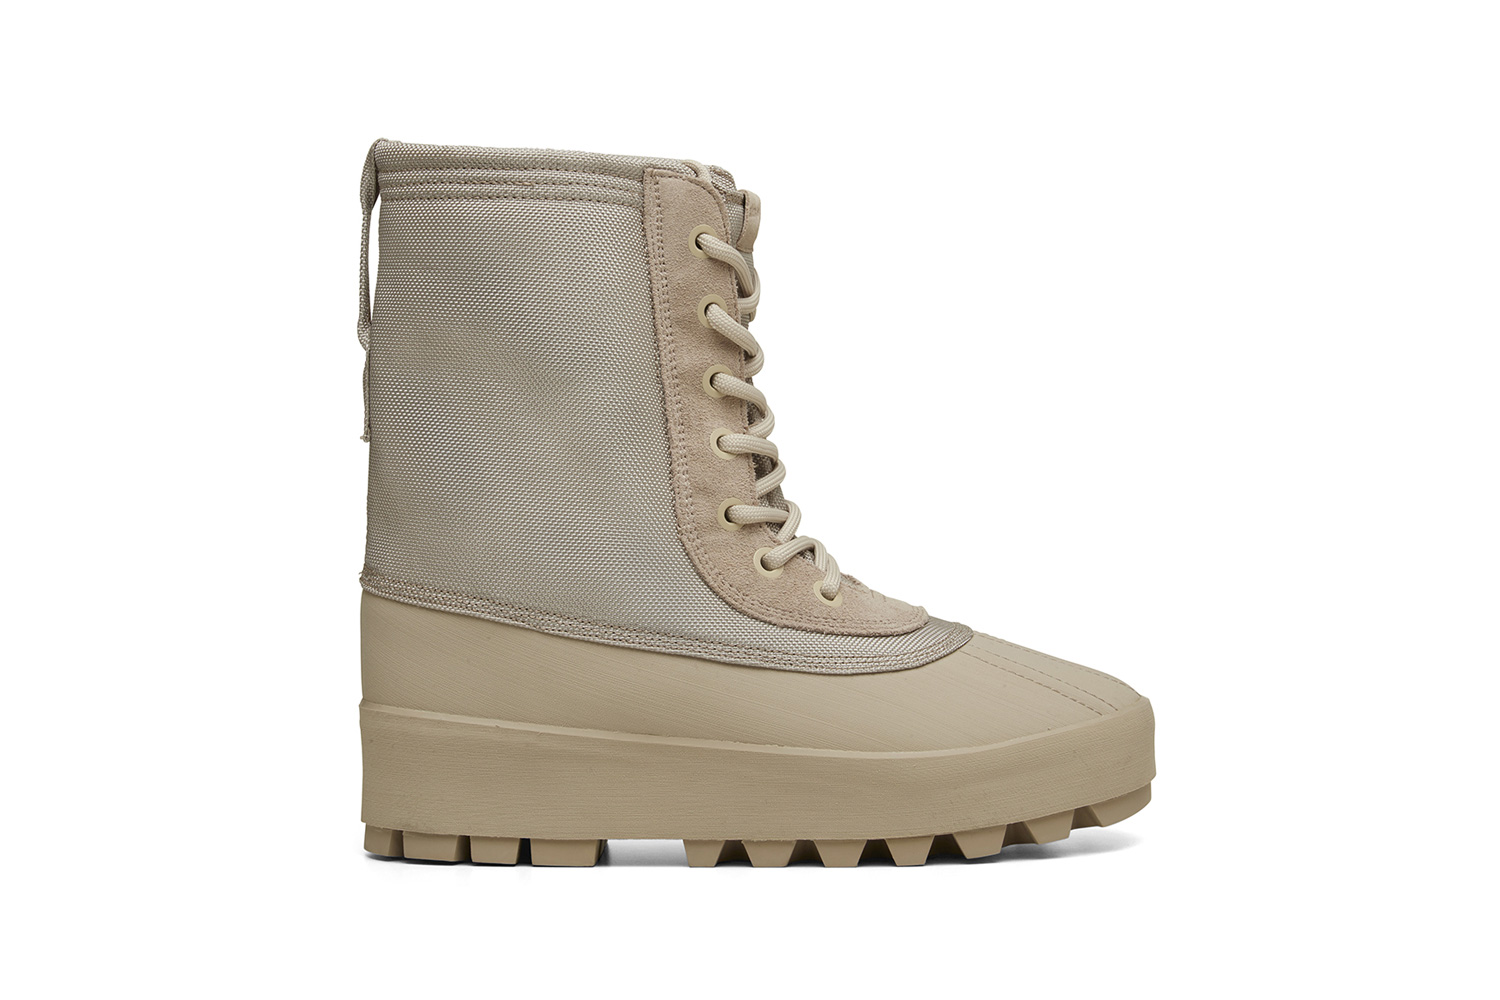 A Full Look at the Yeezy 950 Duck Boot | Highsnobiety